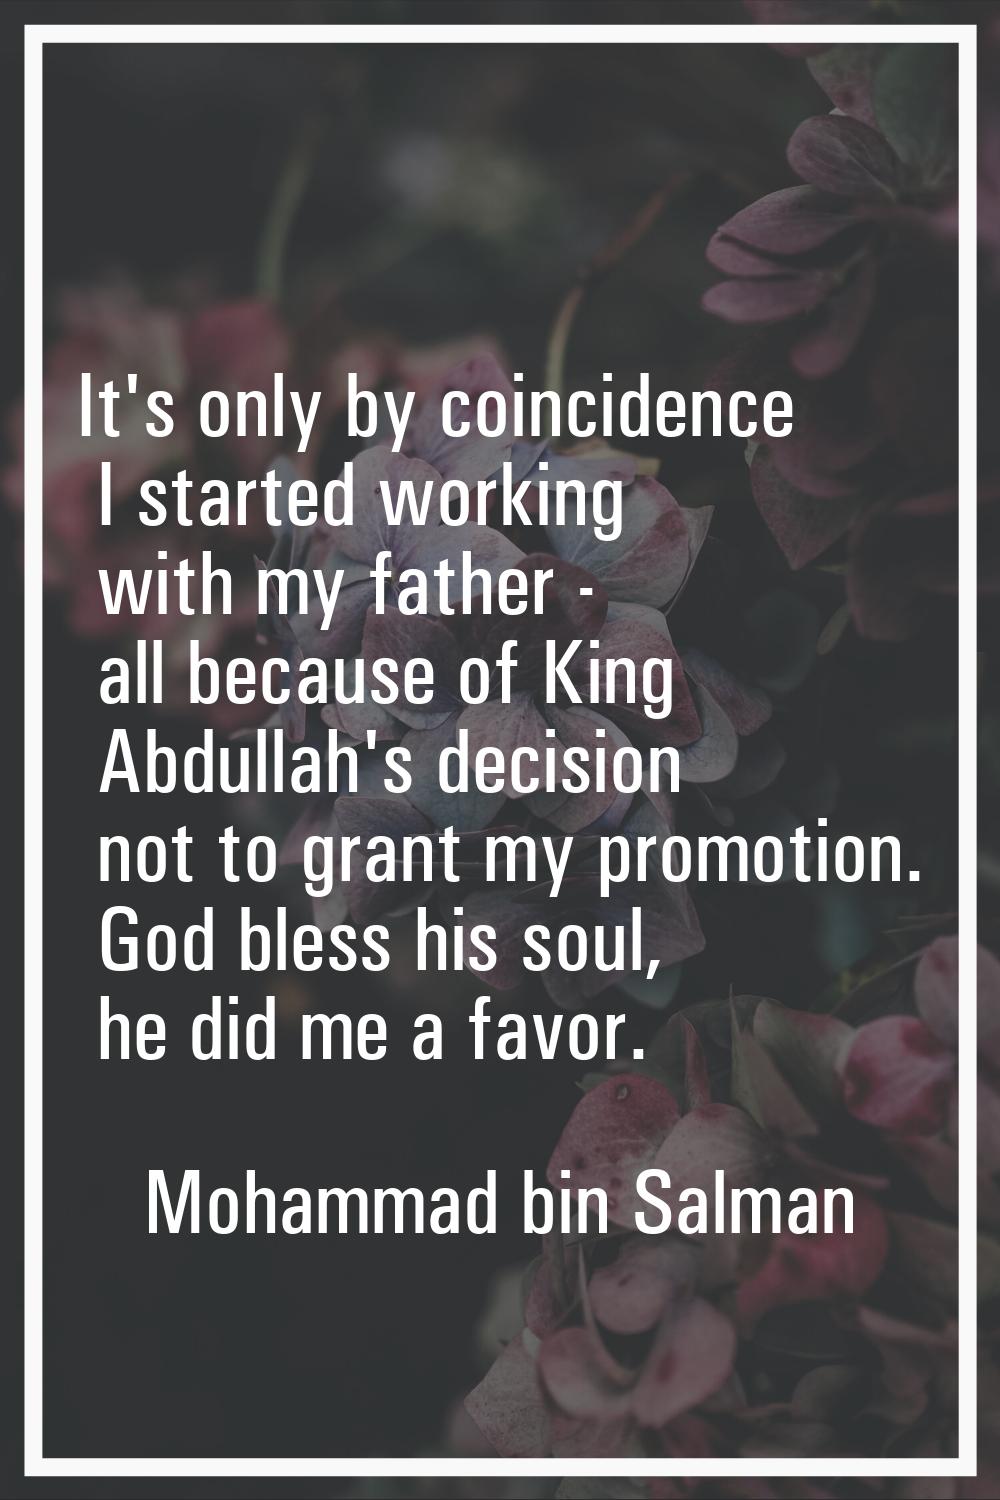 It's only by coincidence I started working with my father - all because of King Abdullah's decision